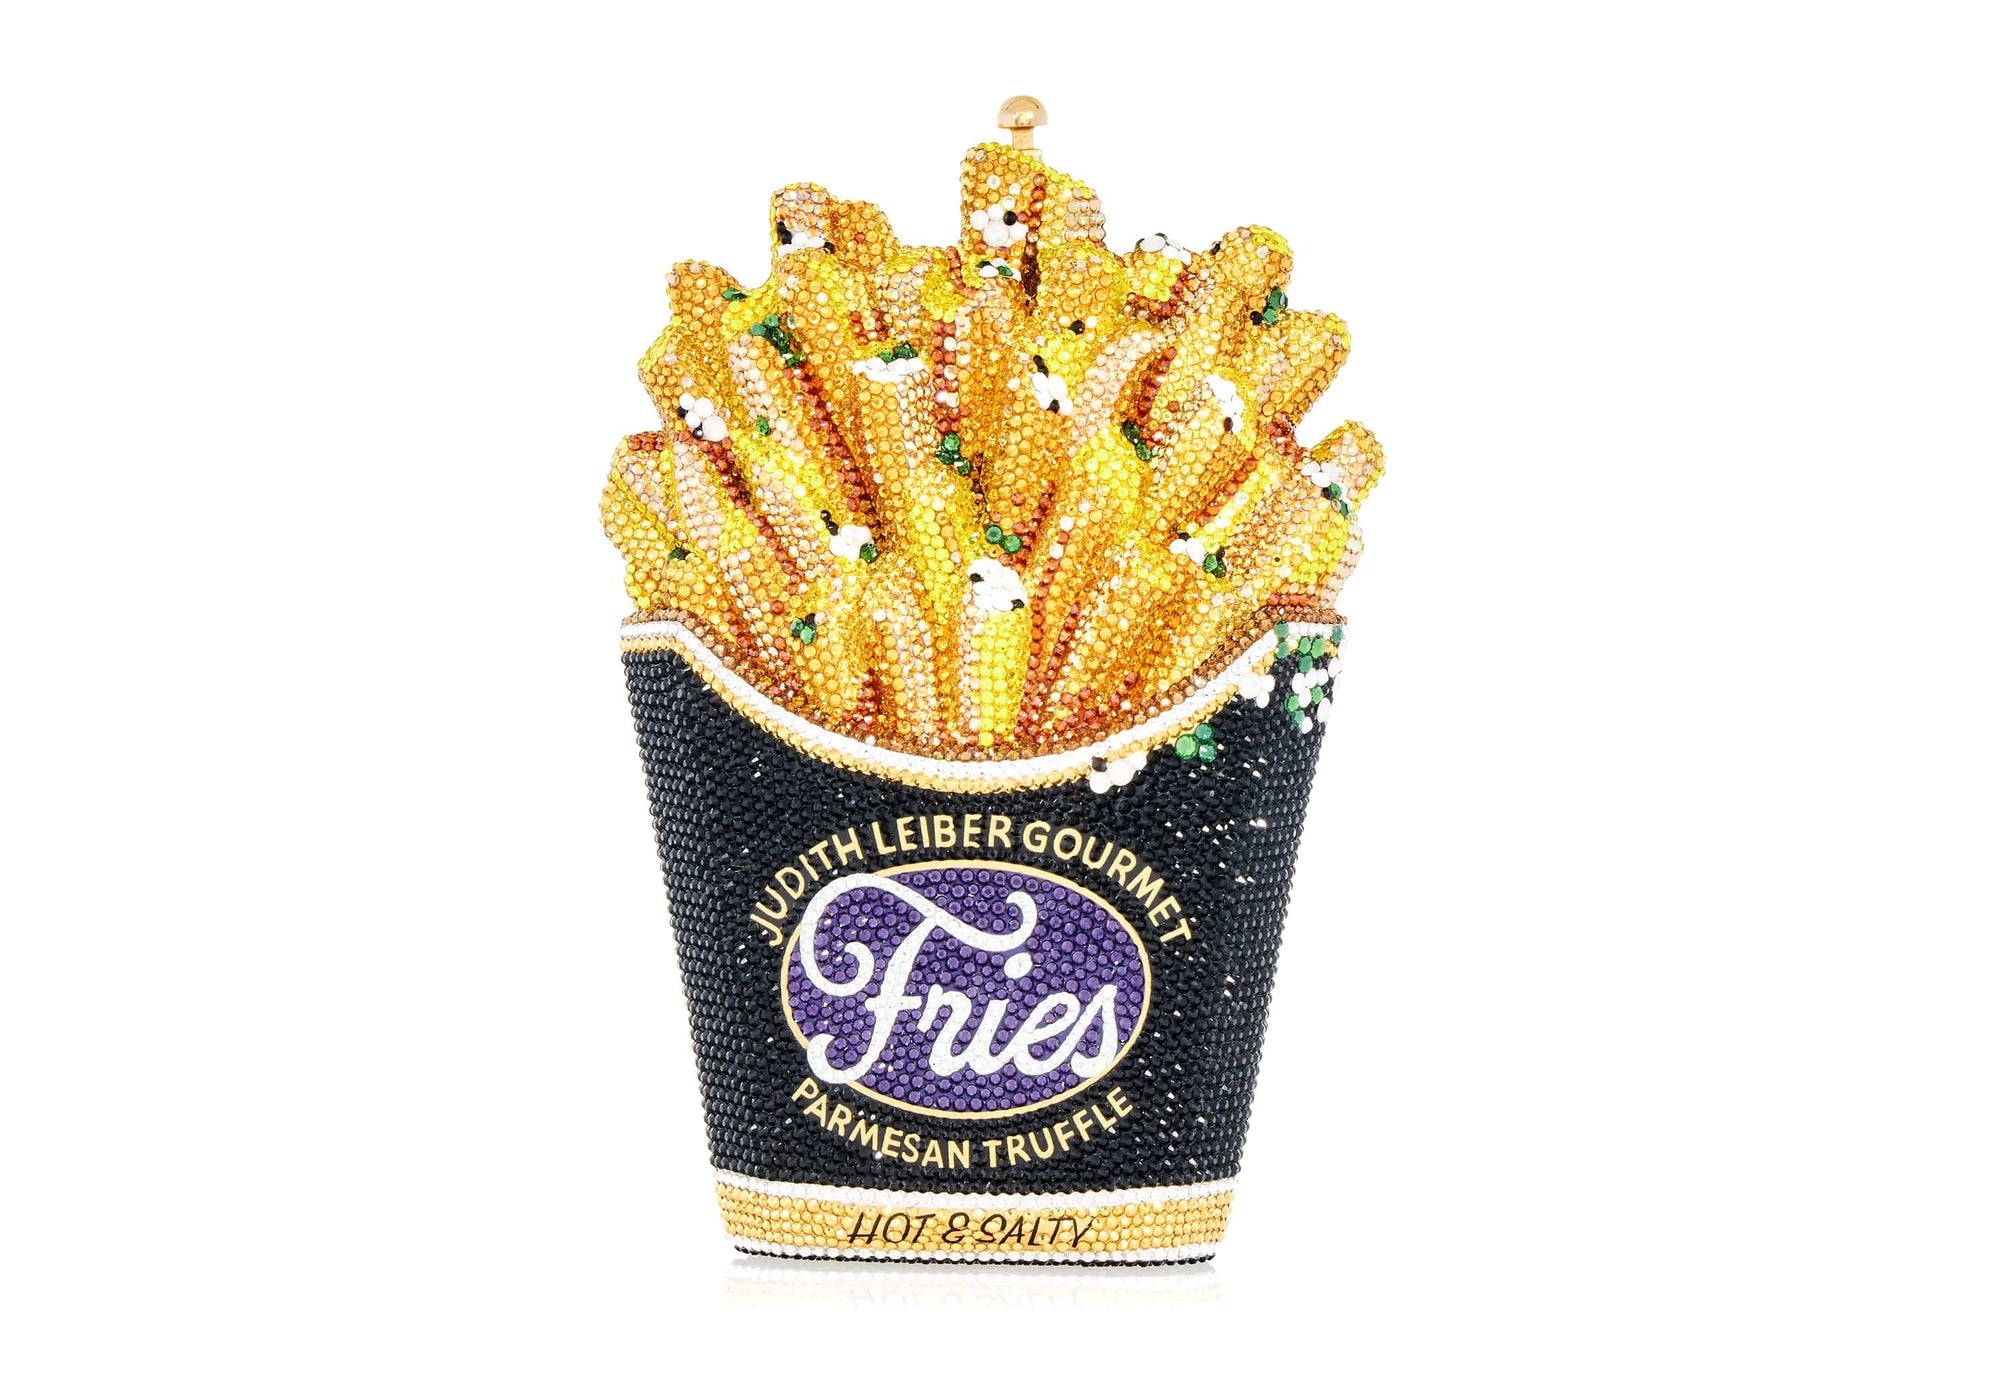 French Fries Truffle Fries